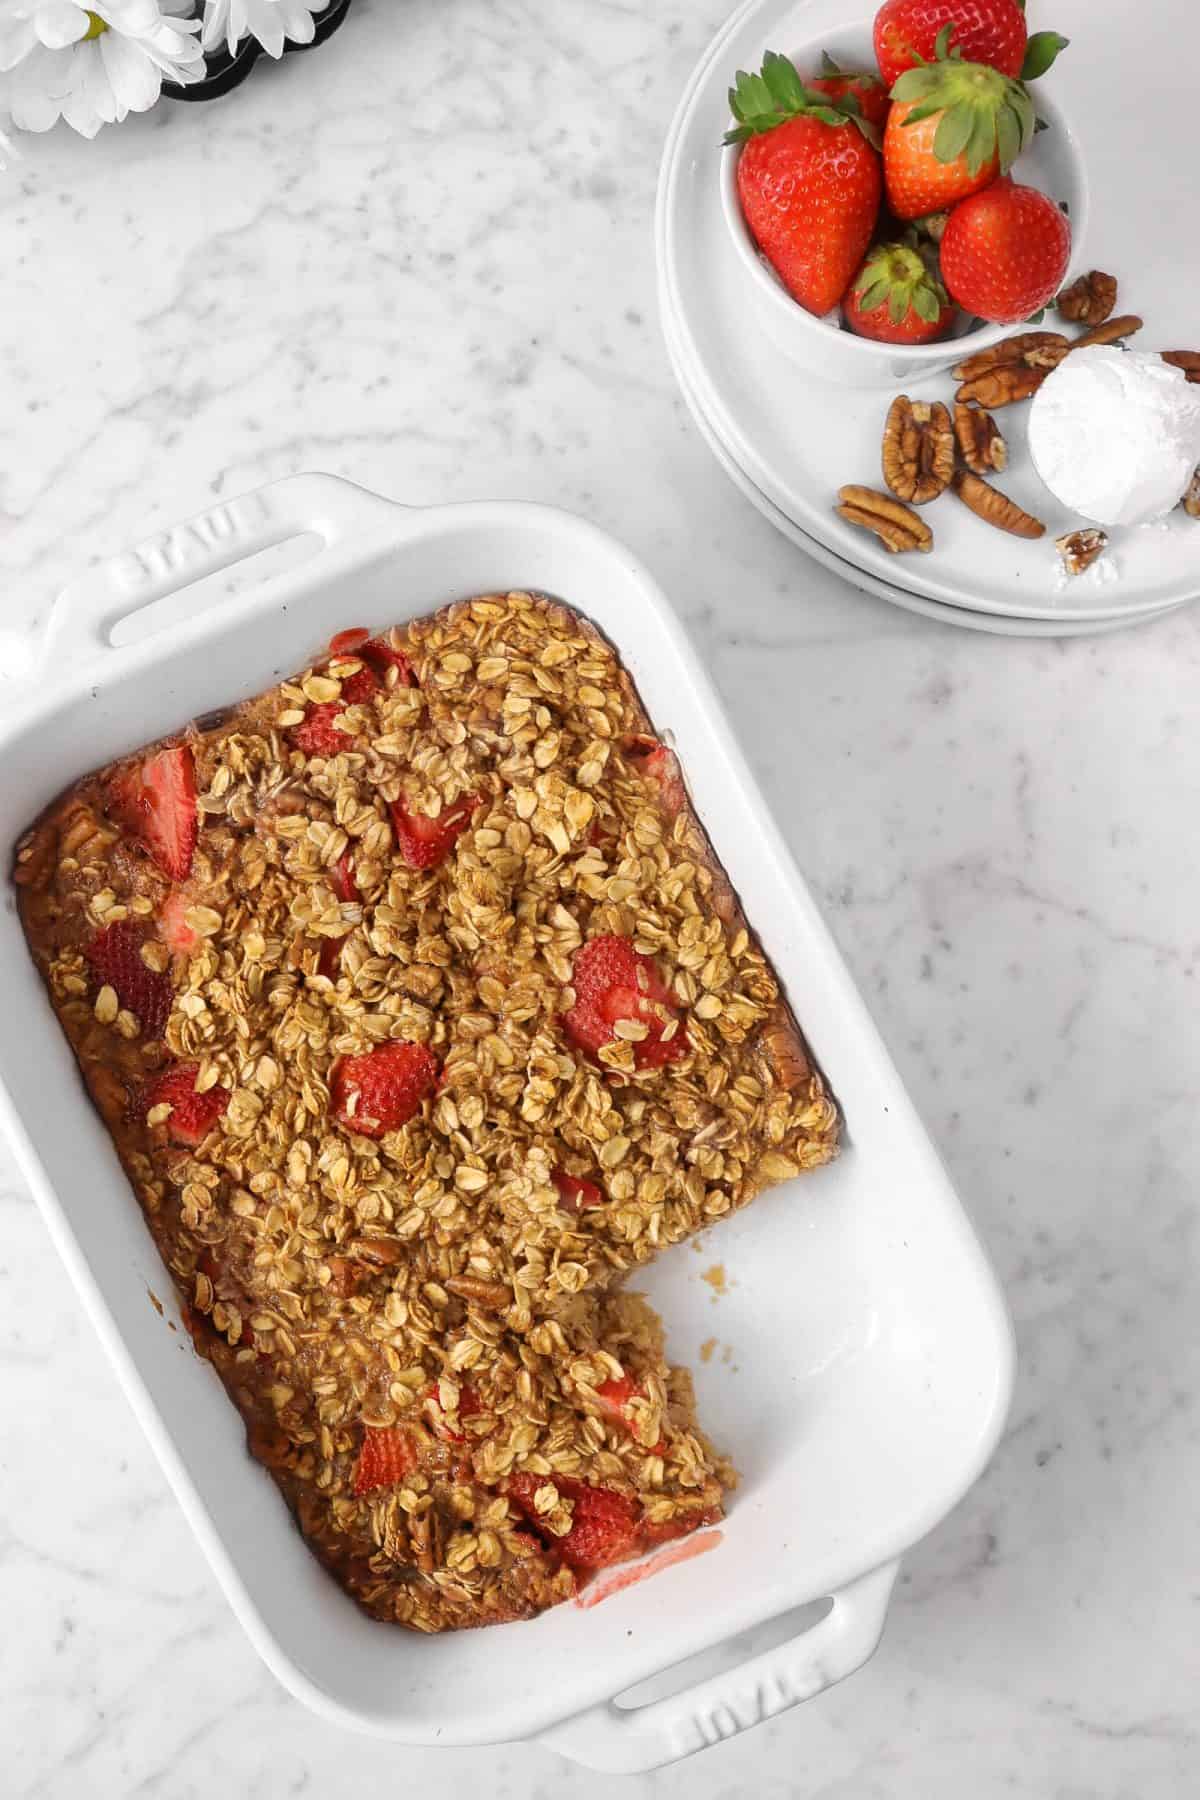 strawberry oatmeal bake with a piece cut out of it on a marble counter with white plates, strawberries, powdered sugar, and pecans